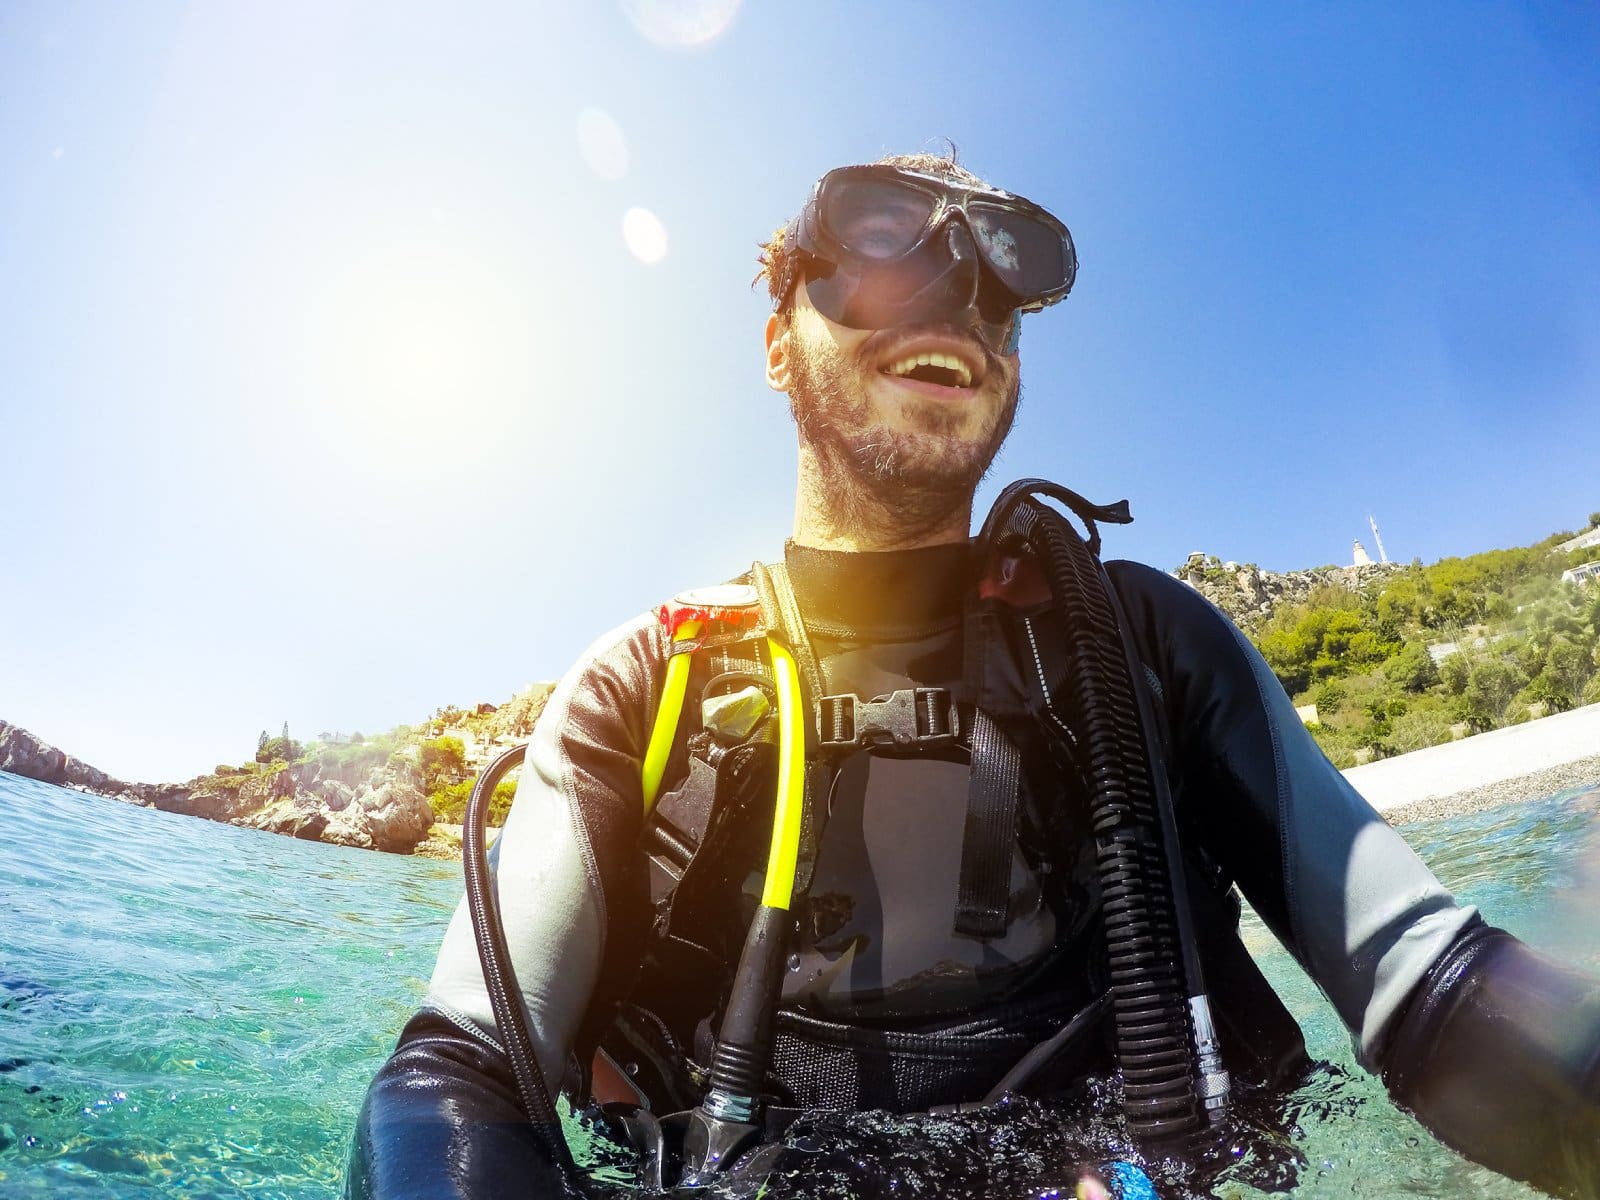 <p class="wp-caption-text">Image Credit: Shutterstock / David MG</p>  <p><span>Embarking on your diving journey in a location renowned for its clarity, biodiversity, and expert instruction is essential for a fulfilling and safe introduction to the underwater world. From the vibrant ecosystems of Thailand to the iconic dive sites around the globe, each destination offers a unique blend of natural beauty and diving excellence.</span></p> <p><span>As you progress from a novice to a seasoned diver, the choice of dive center and location plays a pivotal role in shaping your skills, confidence, and passion for diving. Remember, the proper preparation, education, and environment are key to unlocking the ocean’s wonders.</span></p> <p><span>Choose wisely, dive safely, and embrace the endless adventures beneath the waves. The underwater world is vast and filled with mysteries waiting to be explored; with the proper foundation, you can embark on this journey with assurance and awe.</span></p> <p><span>More Articles Like This…</span></p> <p><a href="https://thegreenvoyage.com/barcelona-discover-the-top-10-beach-clubs/"><span>Barcelona: Discover the Top 10 Beach Clubs</span></a></p> <p><a href="https://thegreenvoyage.com/top-destination-cities-to-visit/"><span>2024 Global City Travel Guide – Your Passport to the World’s Top Destination Cities</span></a></p> <p><a href="https://thegreenvoyage.com/exploring-khao-yai-a-hidden-gem-of-thailand/"><span>Exploring Khao Yai 2024 – A Hidden Gem of Thailand</span></a></p> <p><span>The post <a href="https://passingthru.com/learn-how-to-dive/">Comprehensive Guide to Ultimate Diving Adventures</a> republished on </span><a href="https://passingthru.com/"><span>Passing Thru</span></a><span> with permission from </span><a href="https://thegreenvoyage.com/"><span>The Green Voyage</span></a><span>.</span></p> <p><span>Featured Image Credit: Shutterstock / Lillac.</span></p> <p><span>For transparency, this content was partly developed with AI assistance and carefully curated by an experienced editor to be informative and ensure accuracy.</span></p>